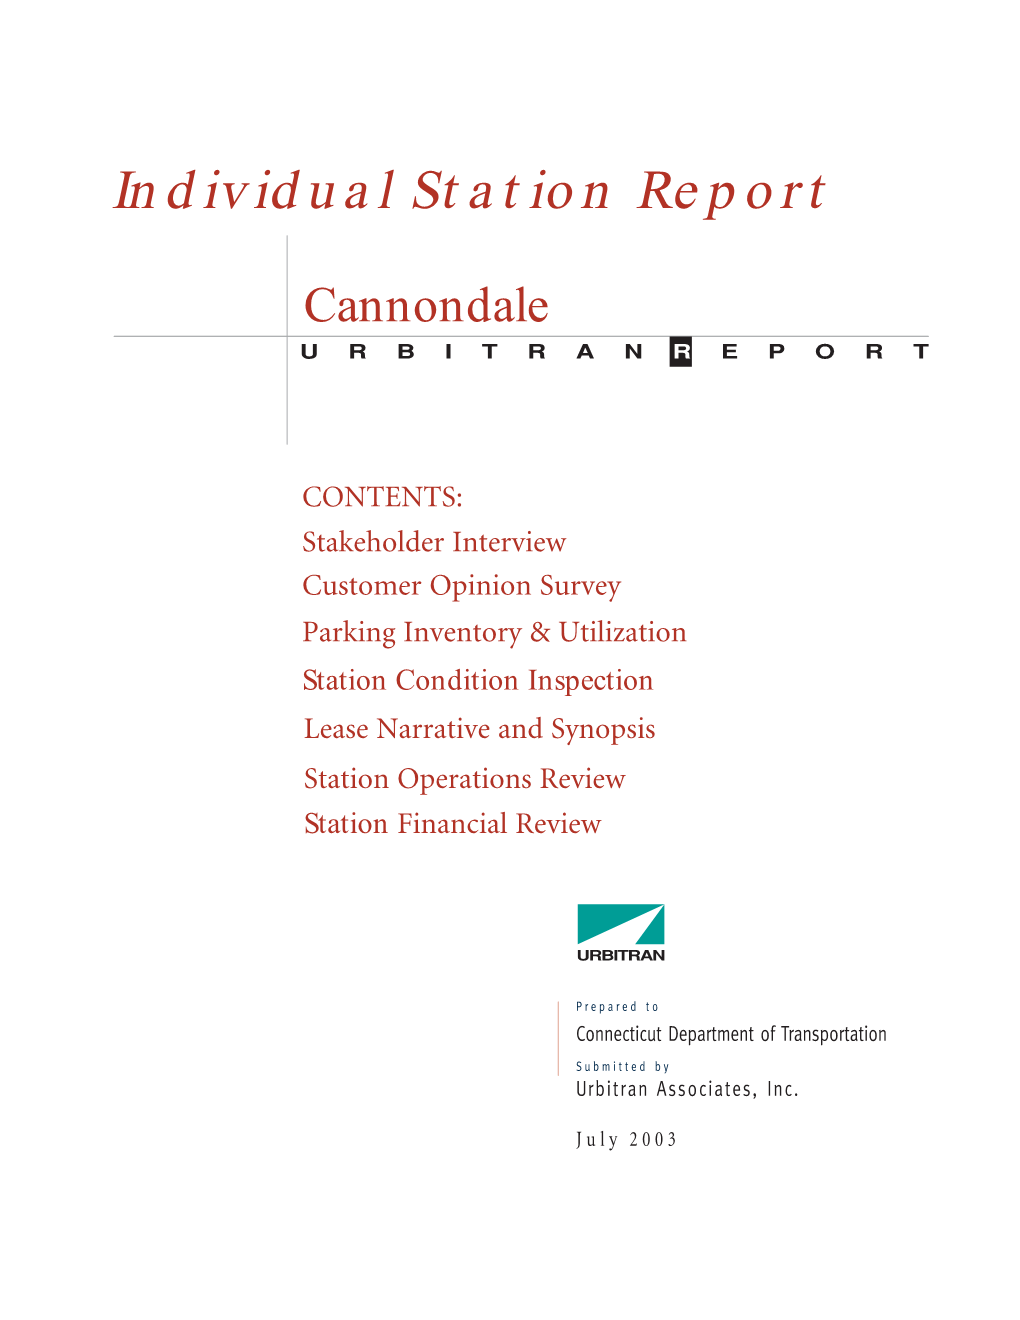 Individual Station Report